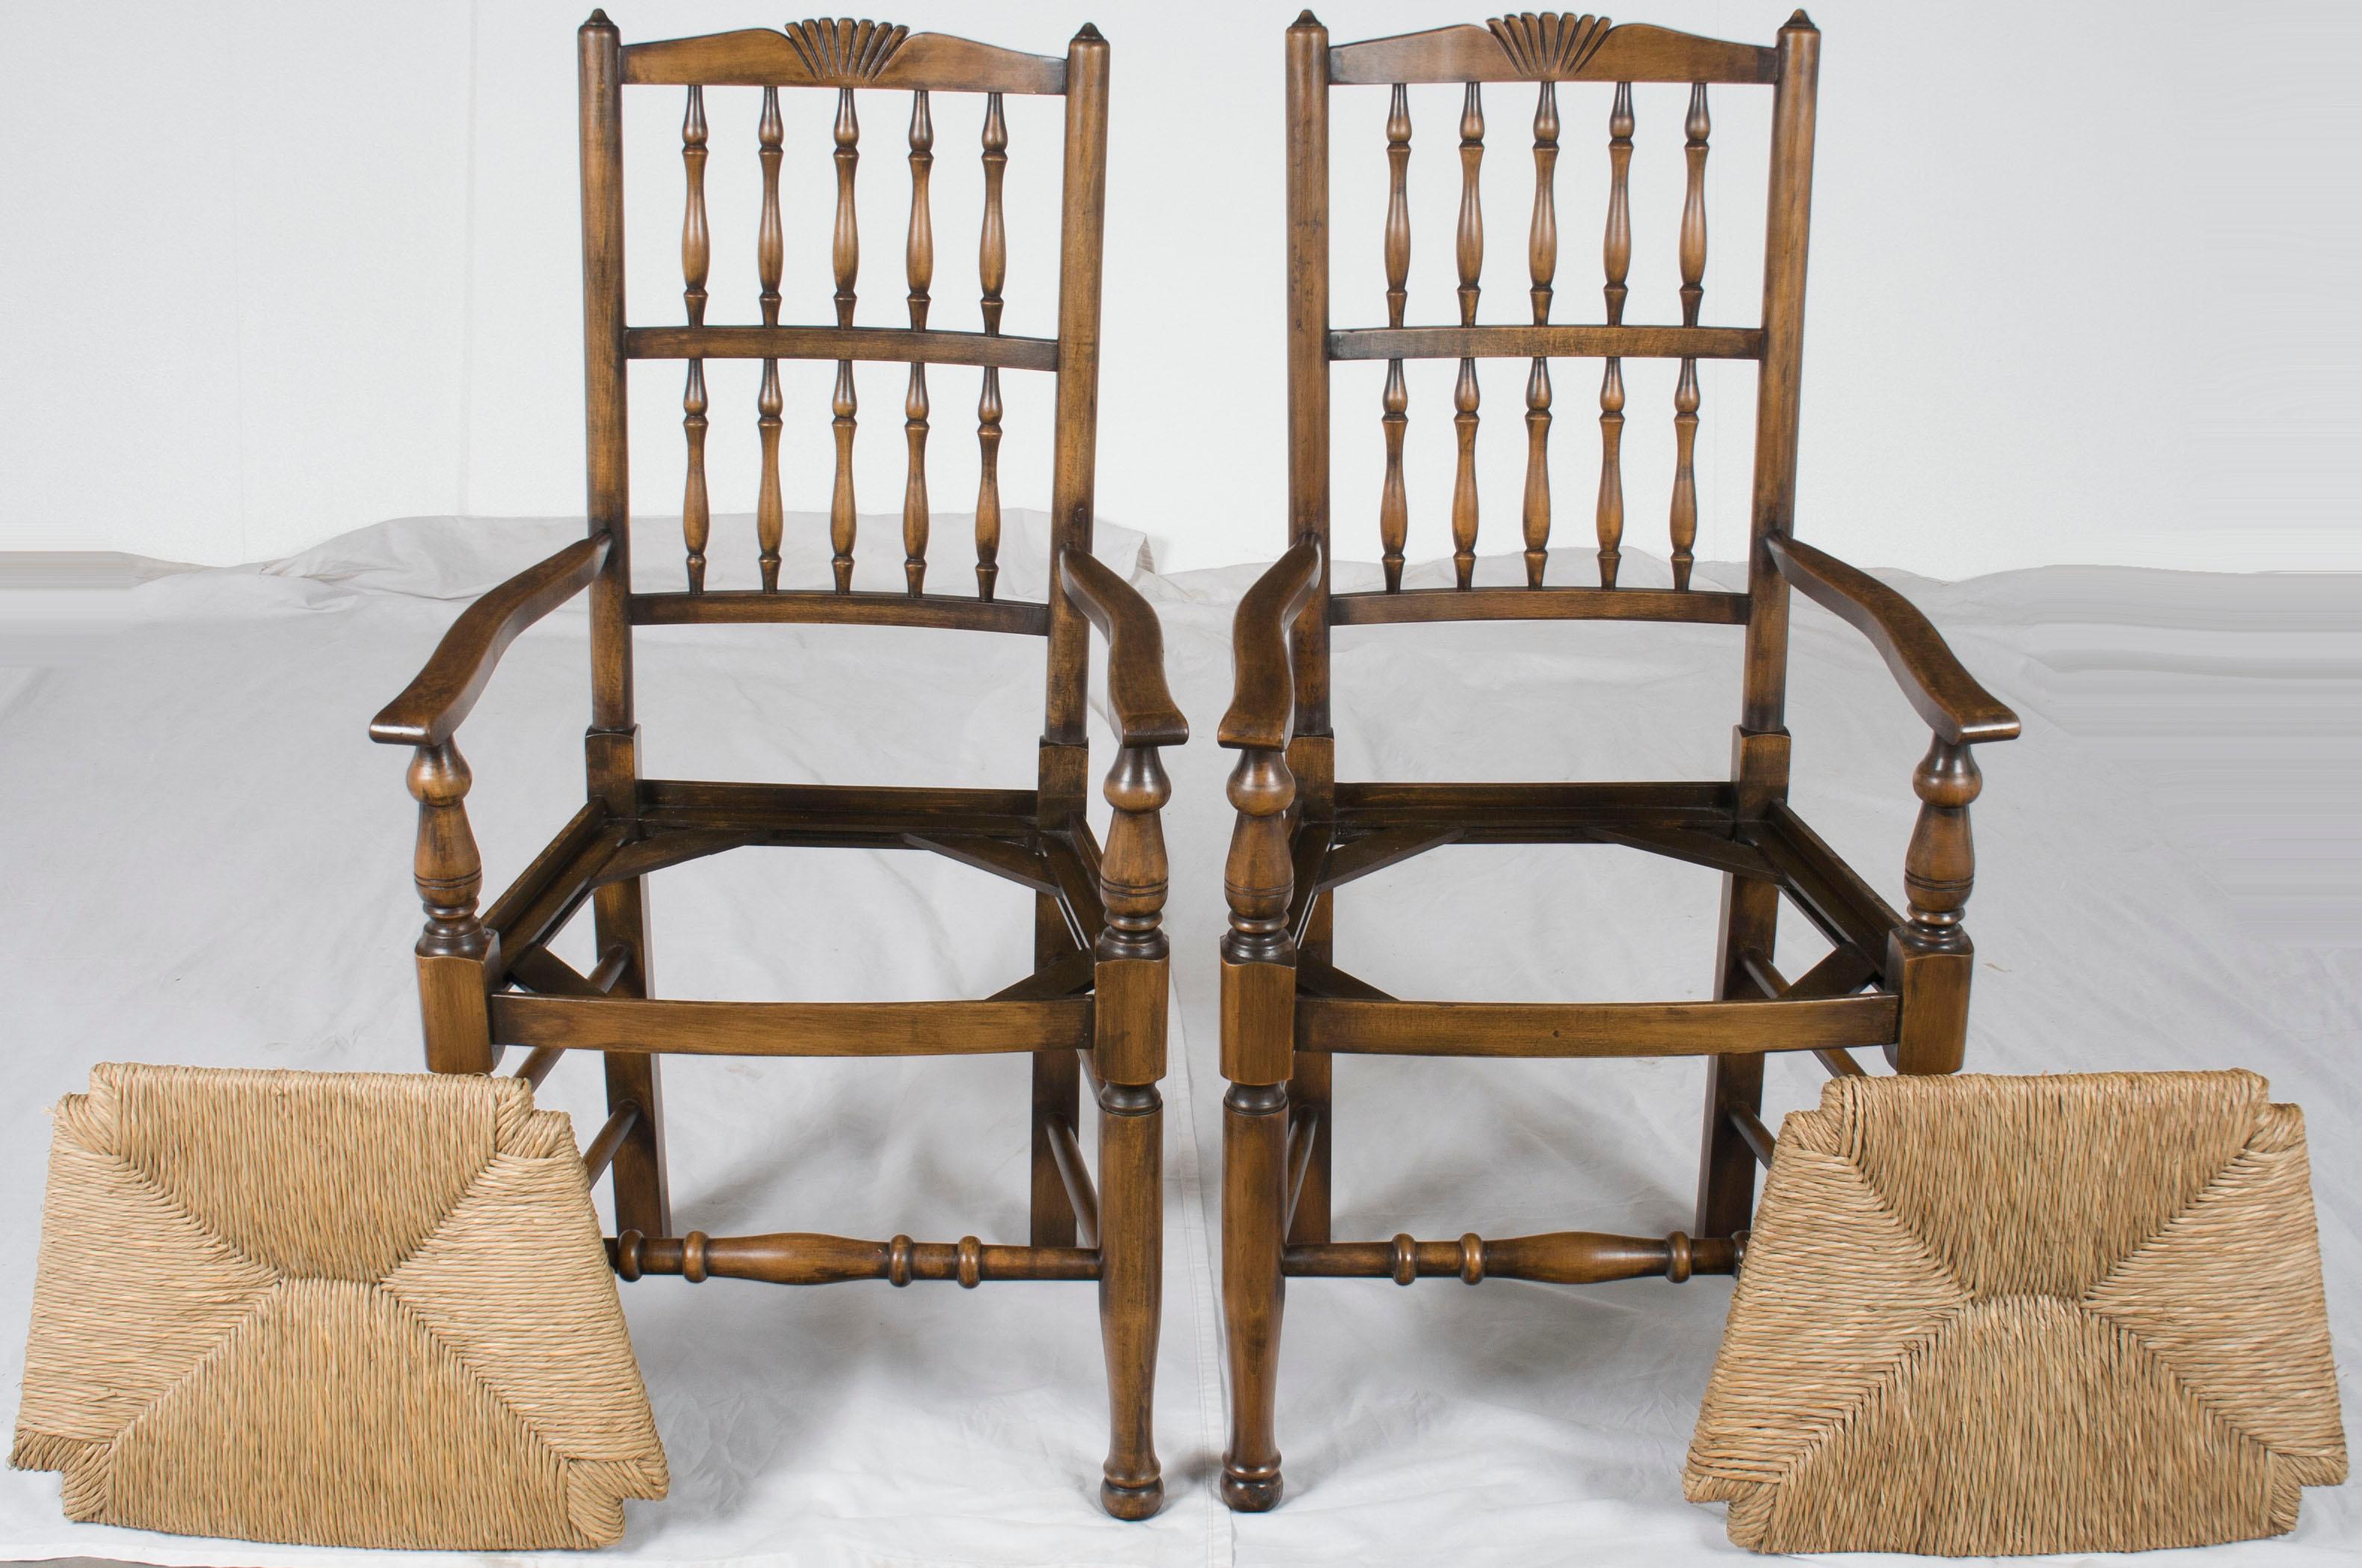 This lovely pair of English country dining chairs would look great in any kitchen or breakfast nook. Their country style is accented with splendid rush seats that are quite comfortable.

This set comes from England and was made there recently.